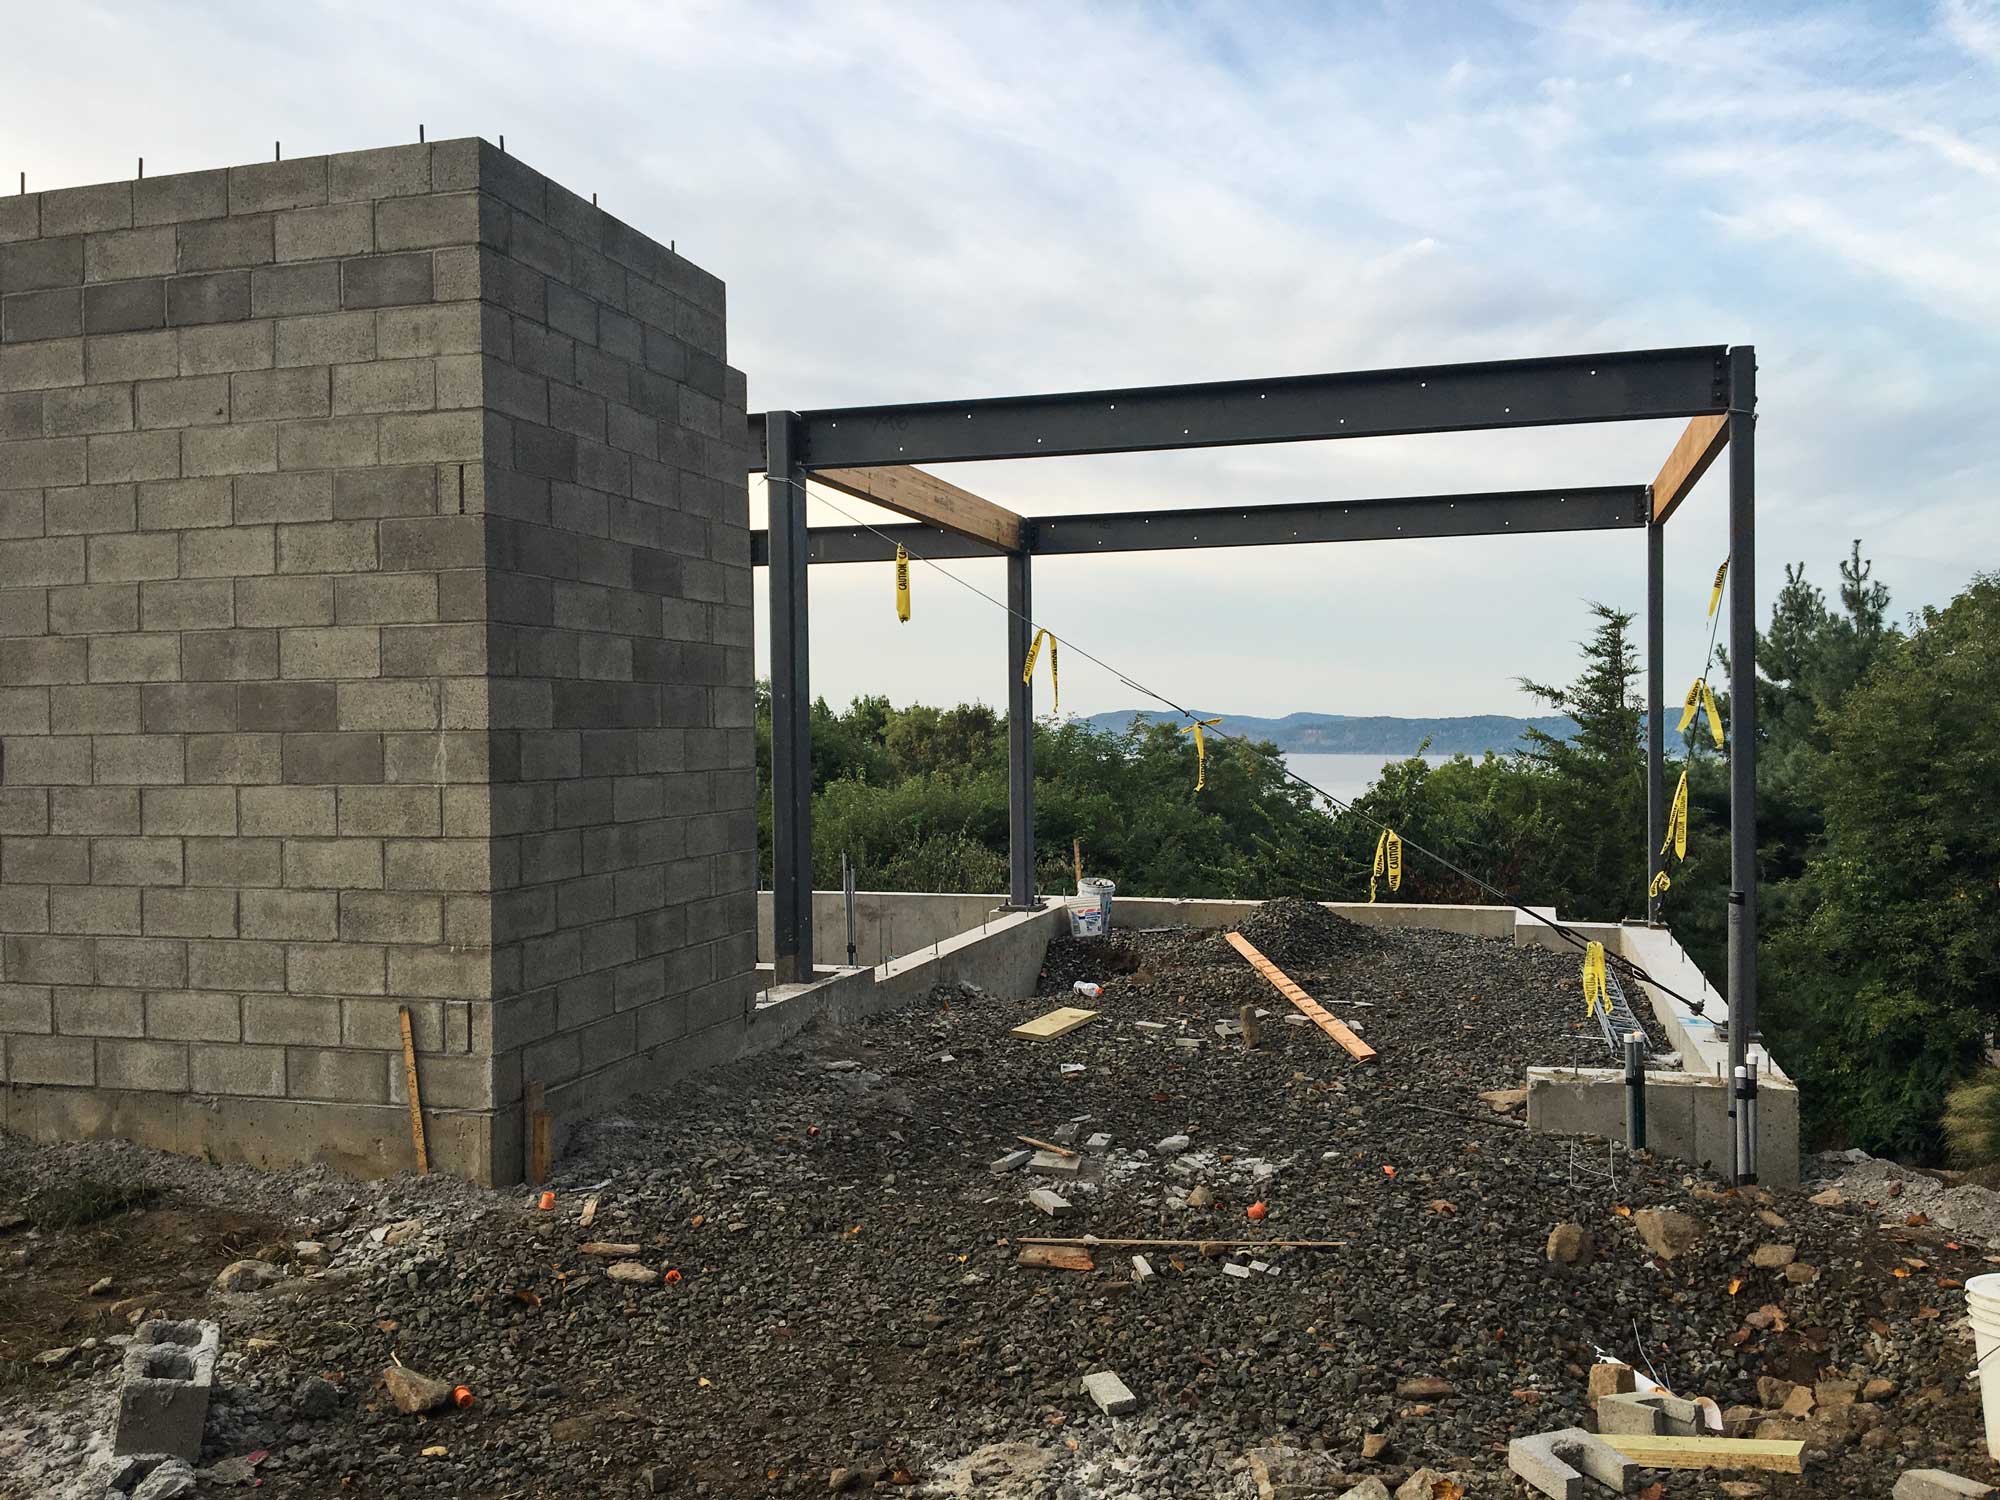   Carport &amp; Entry  --  The future driveway will slide below the house and frame a fantastic view of the Hudson River beyond.  